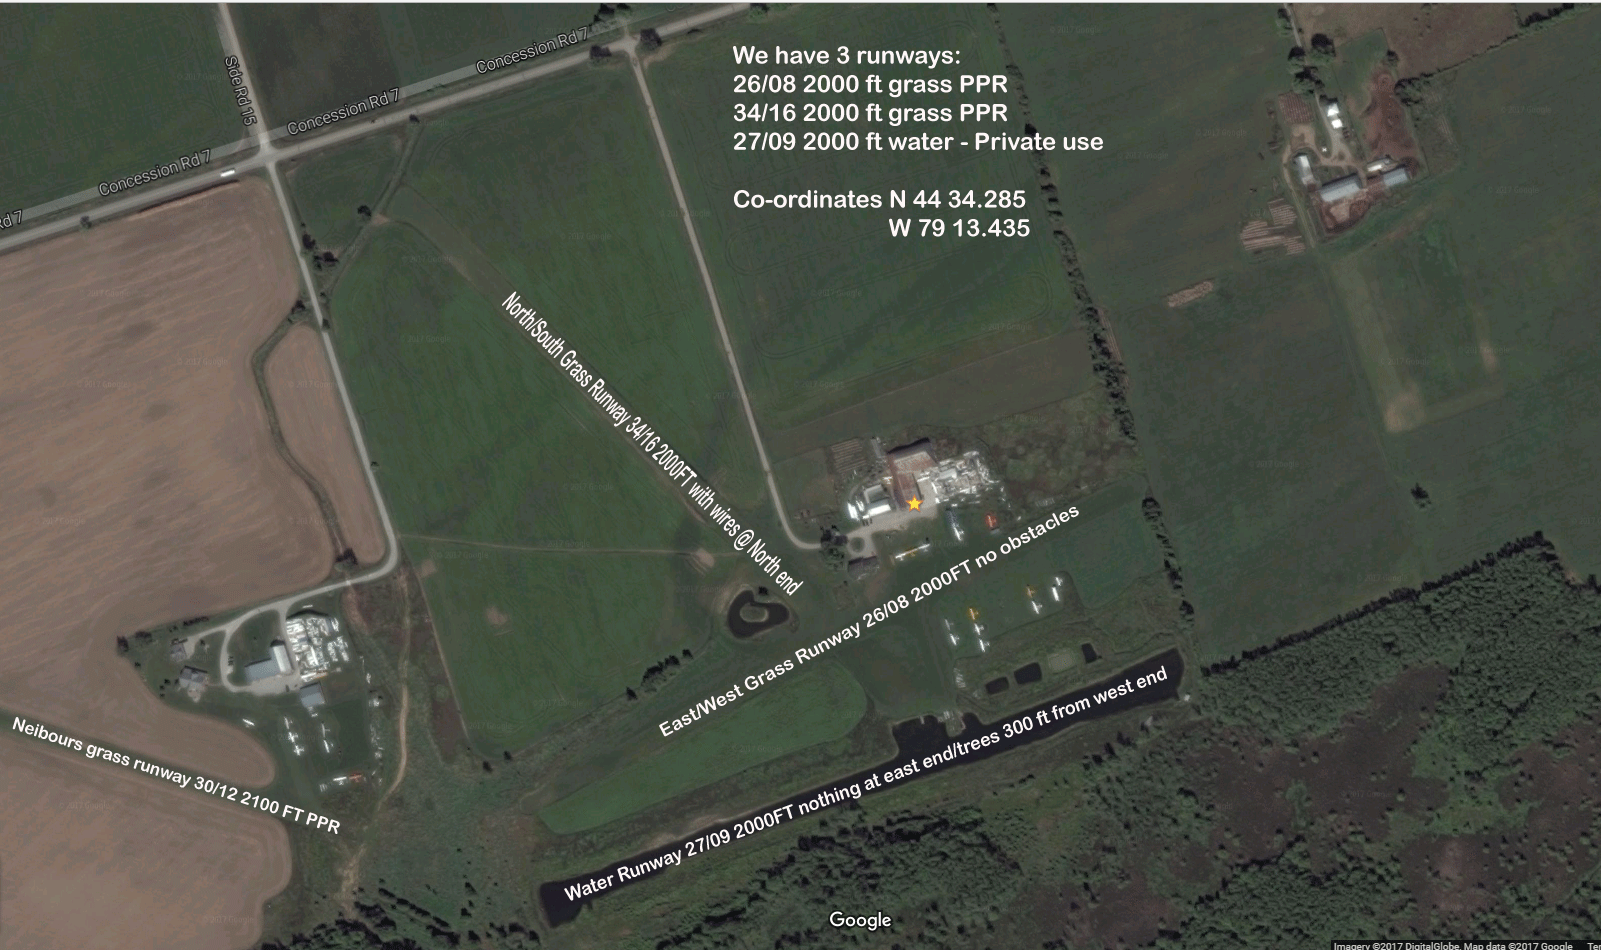 Labelled image of our runways